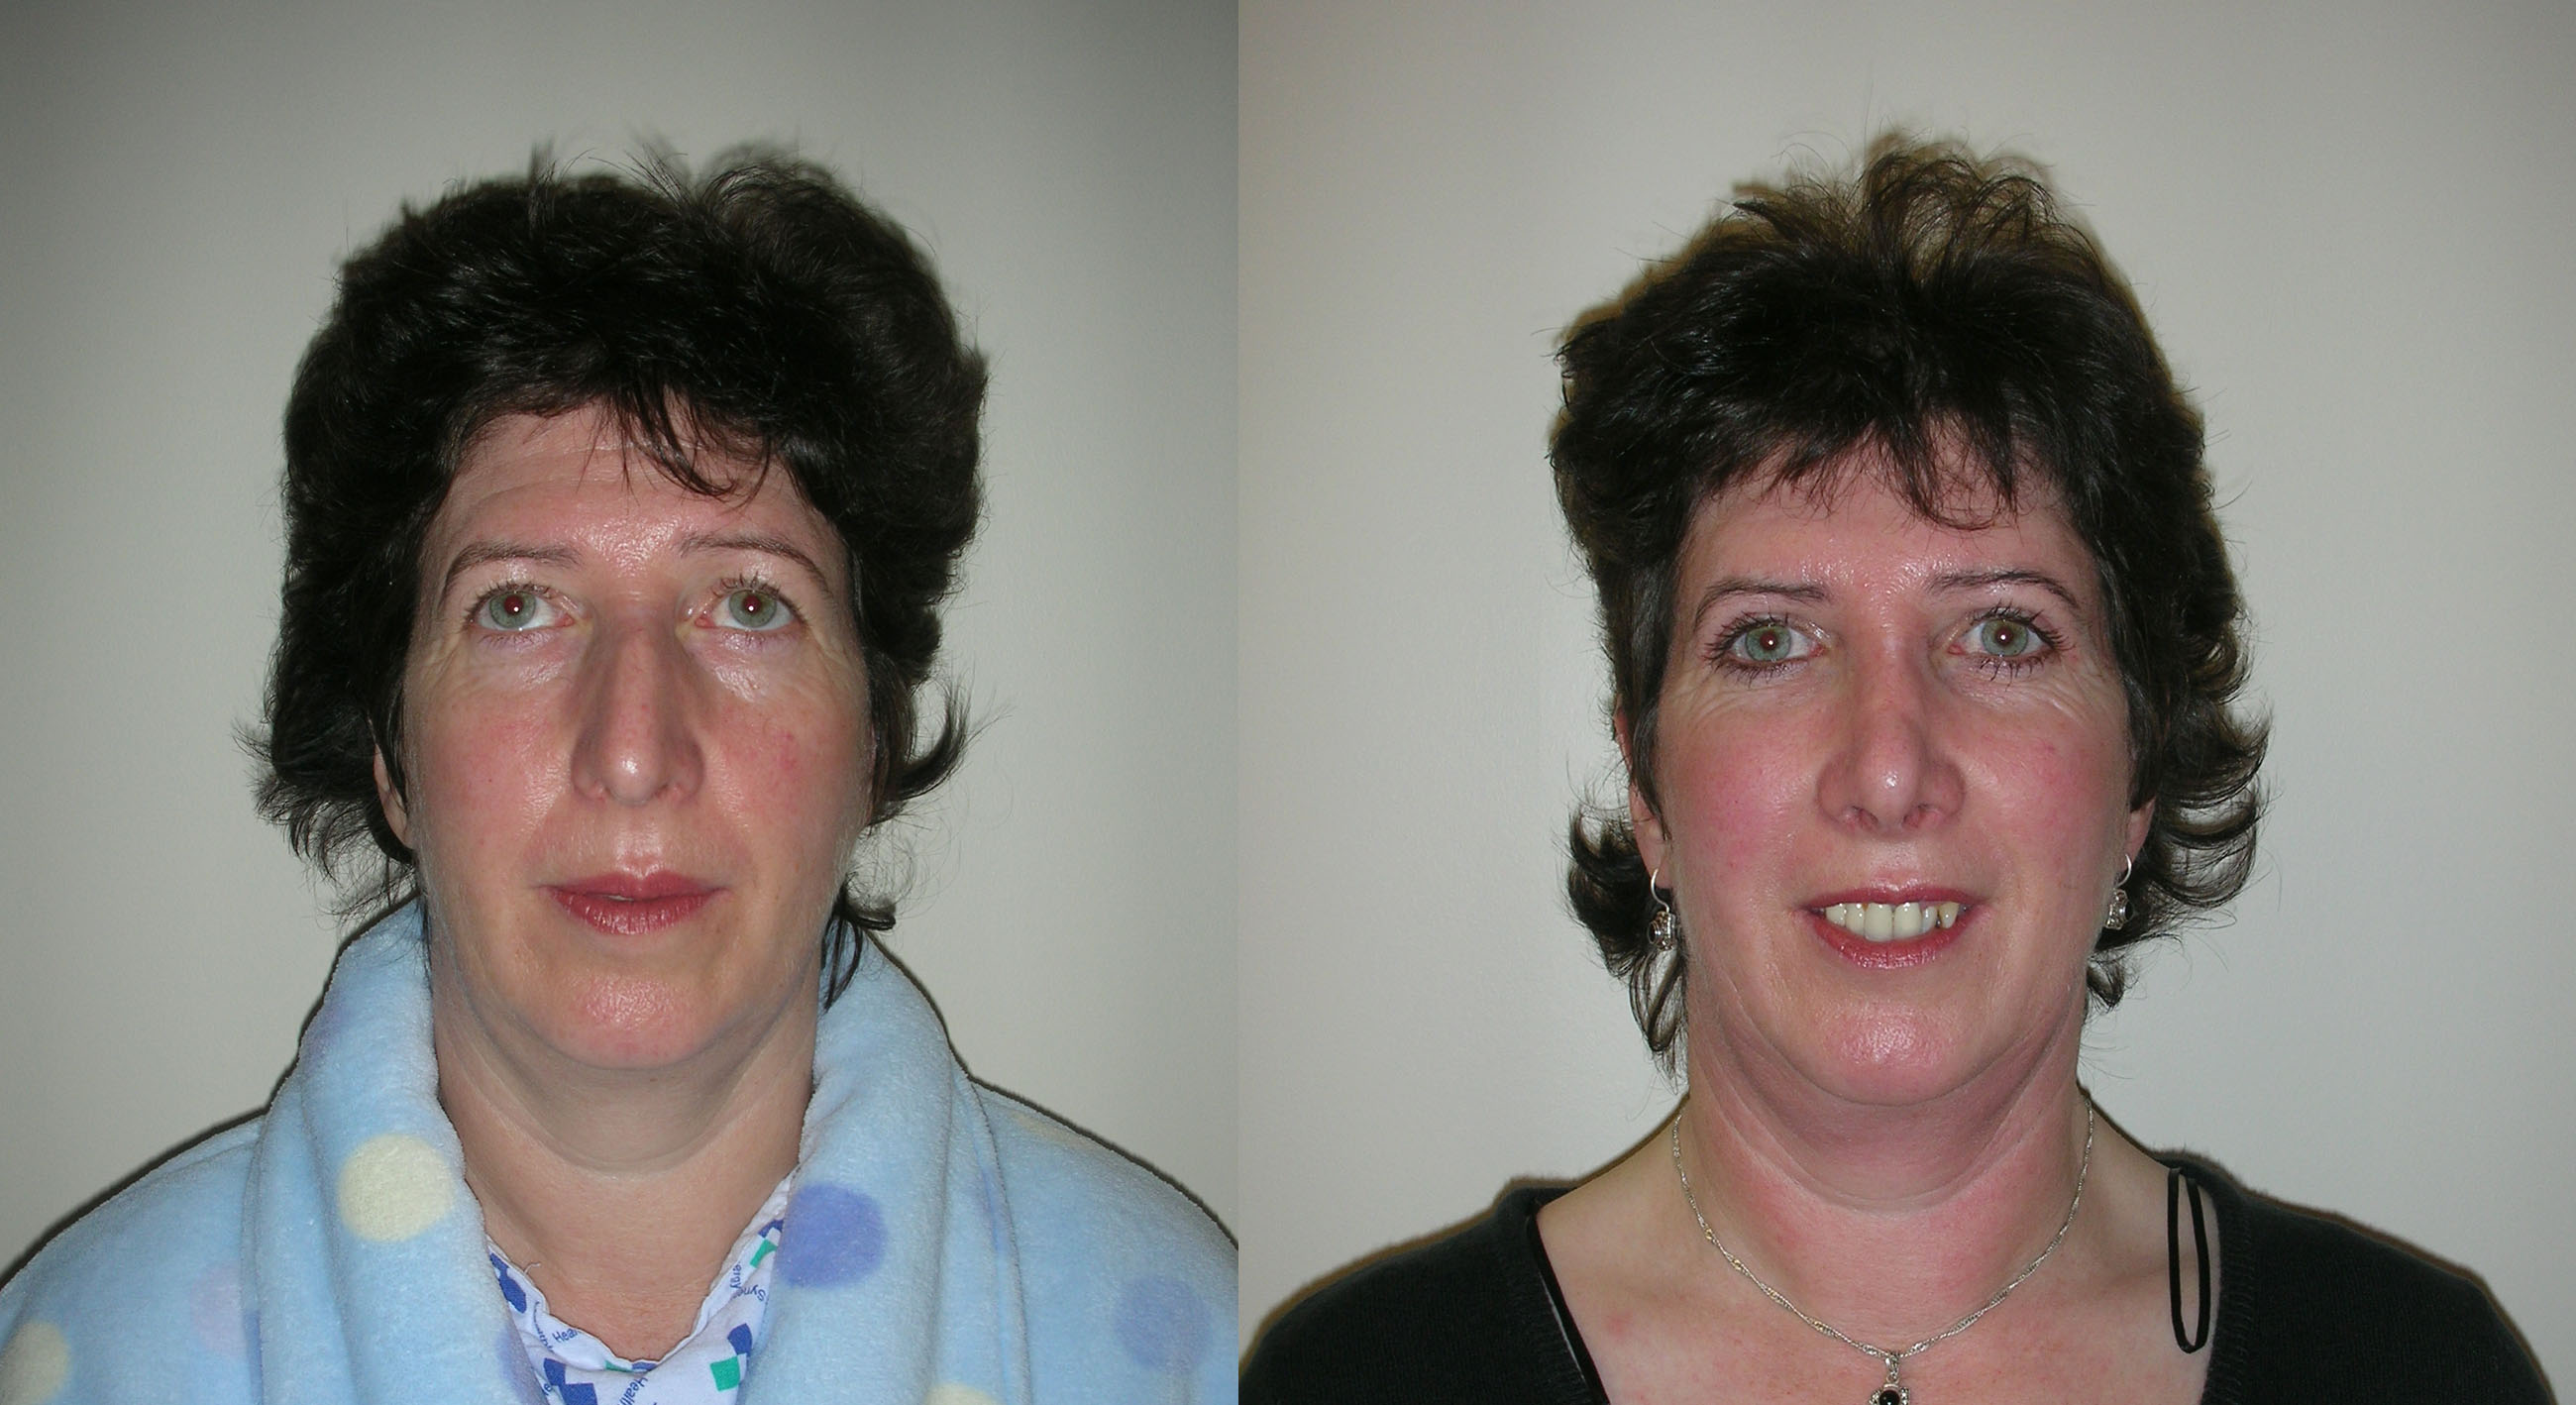 Rhinoplasty / Nose Job surgery in Manchester and London